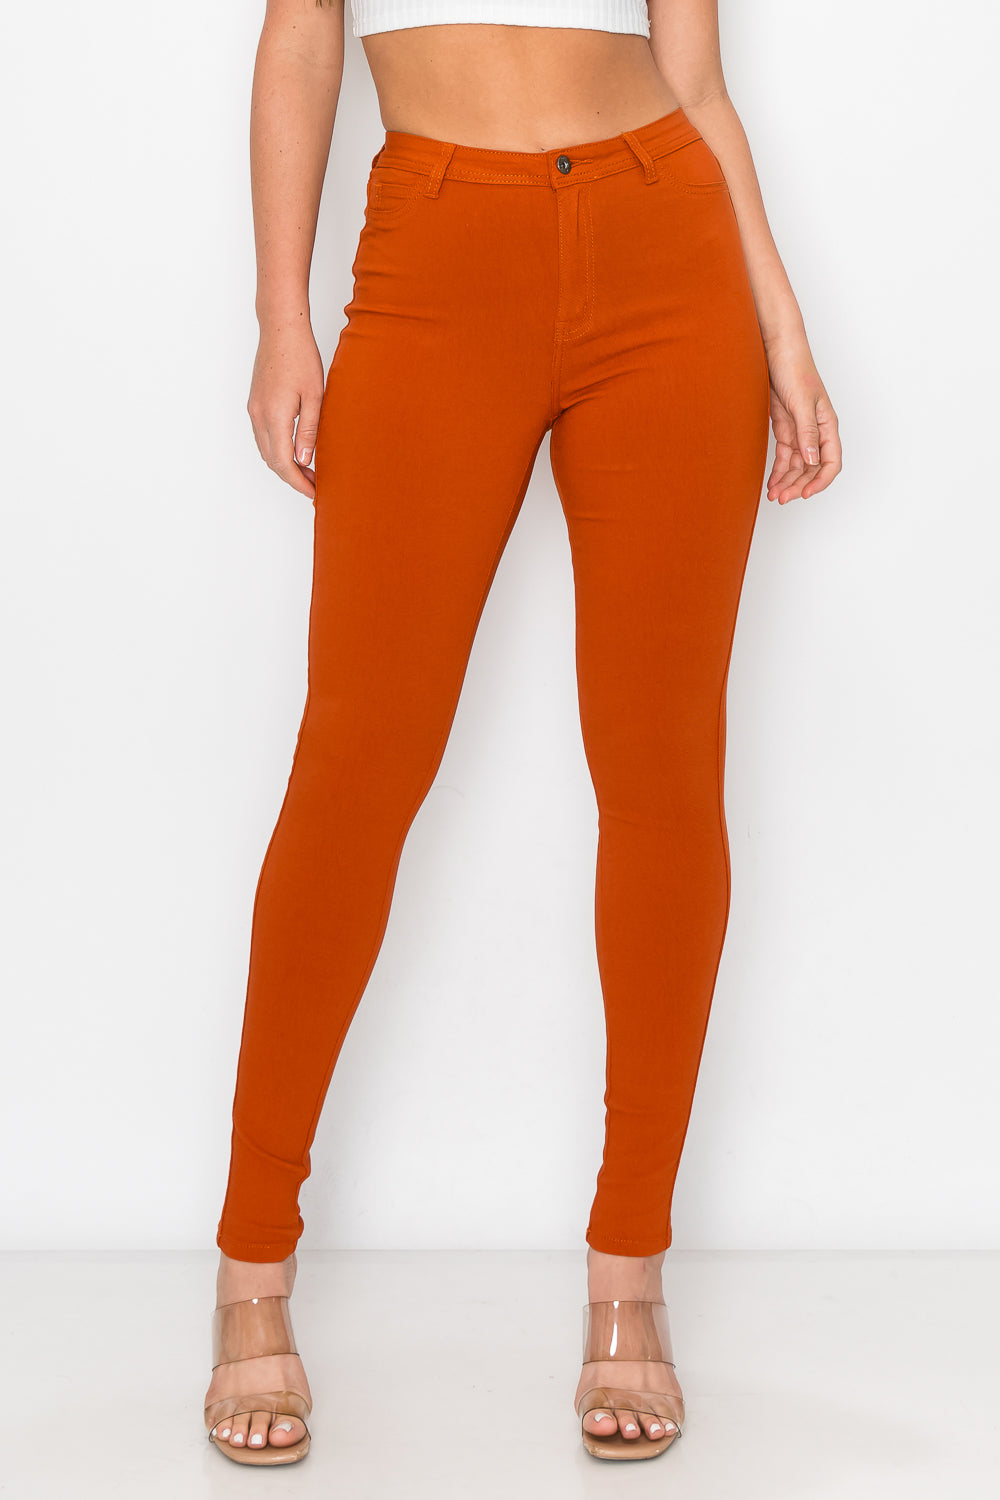 HIGH WAISTED COLORED SUPER-STRETCH JEANS RUST - LOVER BRAND FASHION